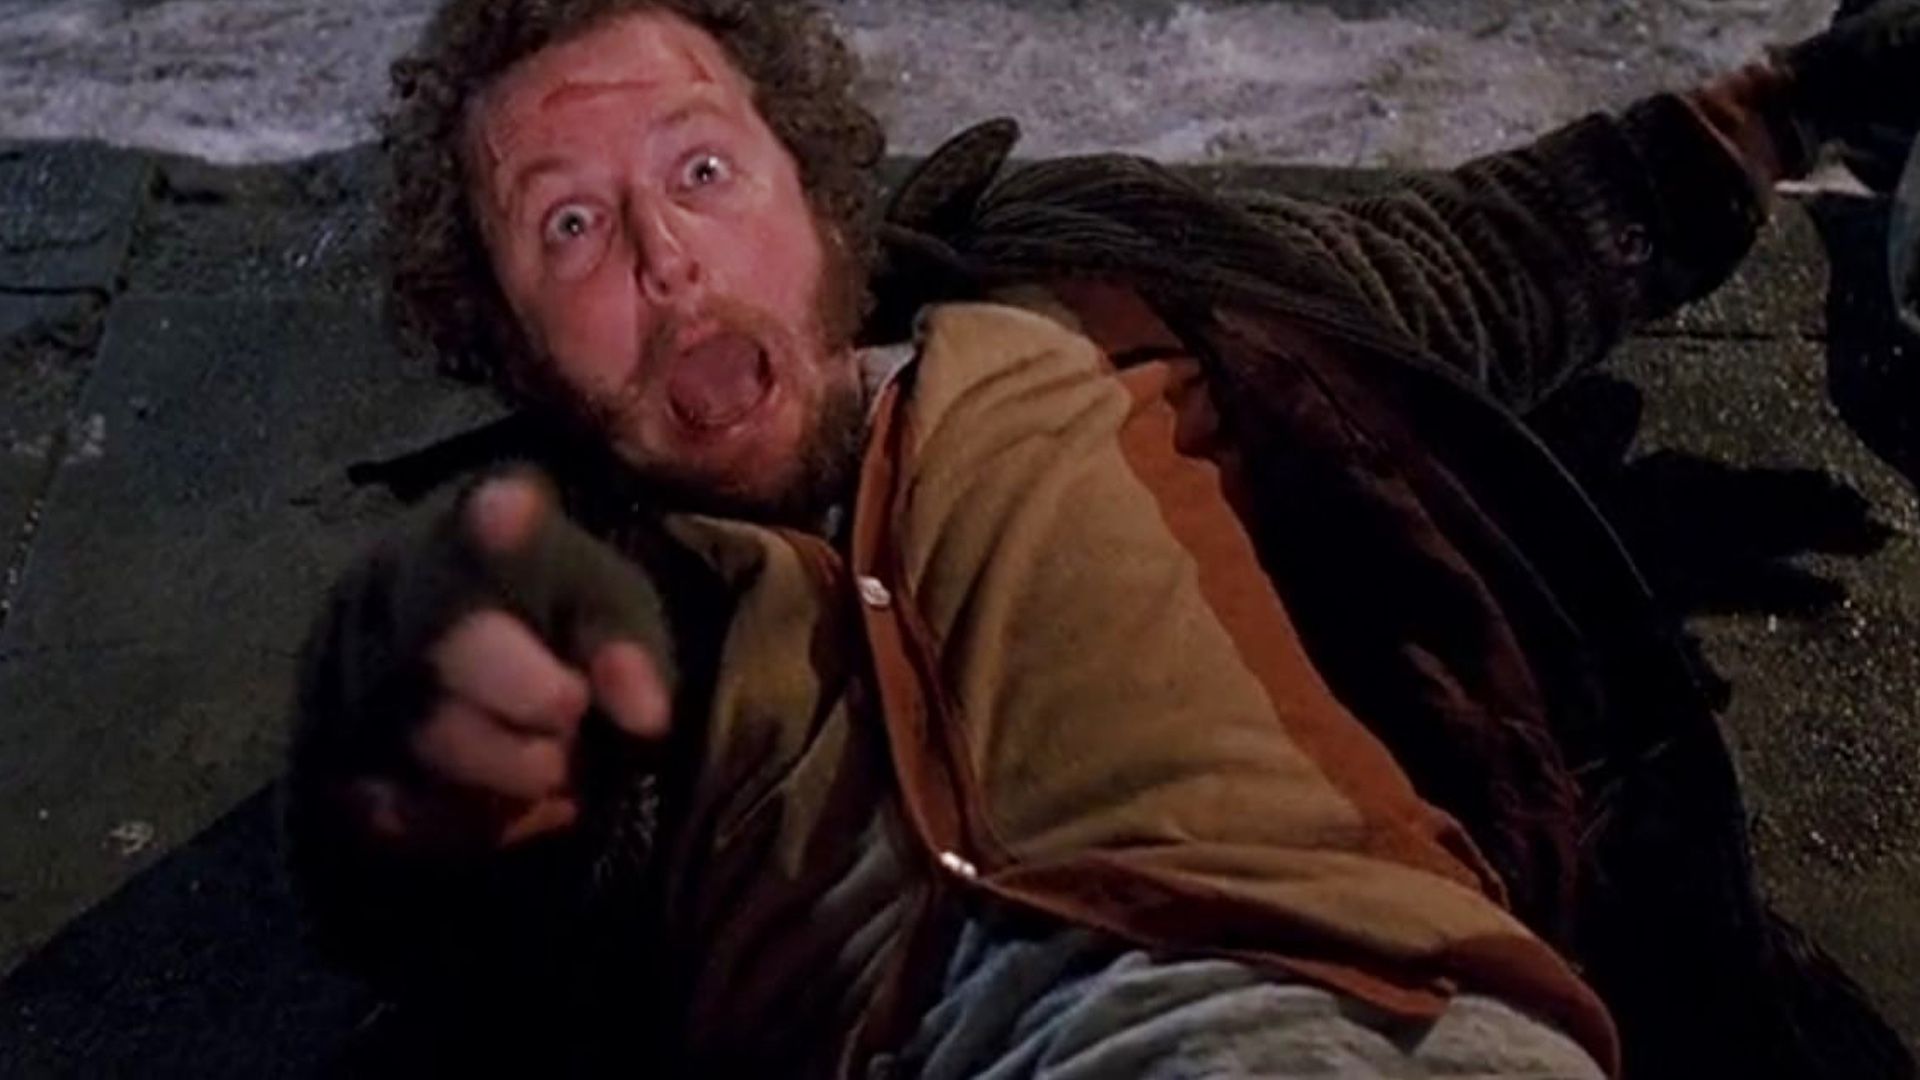 Daniel Stern Releases Funny Response to Macaulay Culkin's HOME ALONE Reprisal